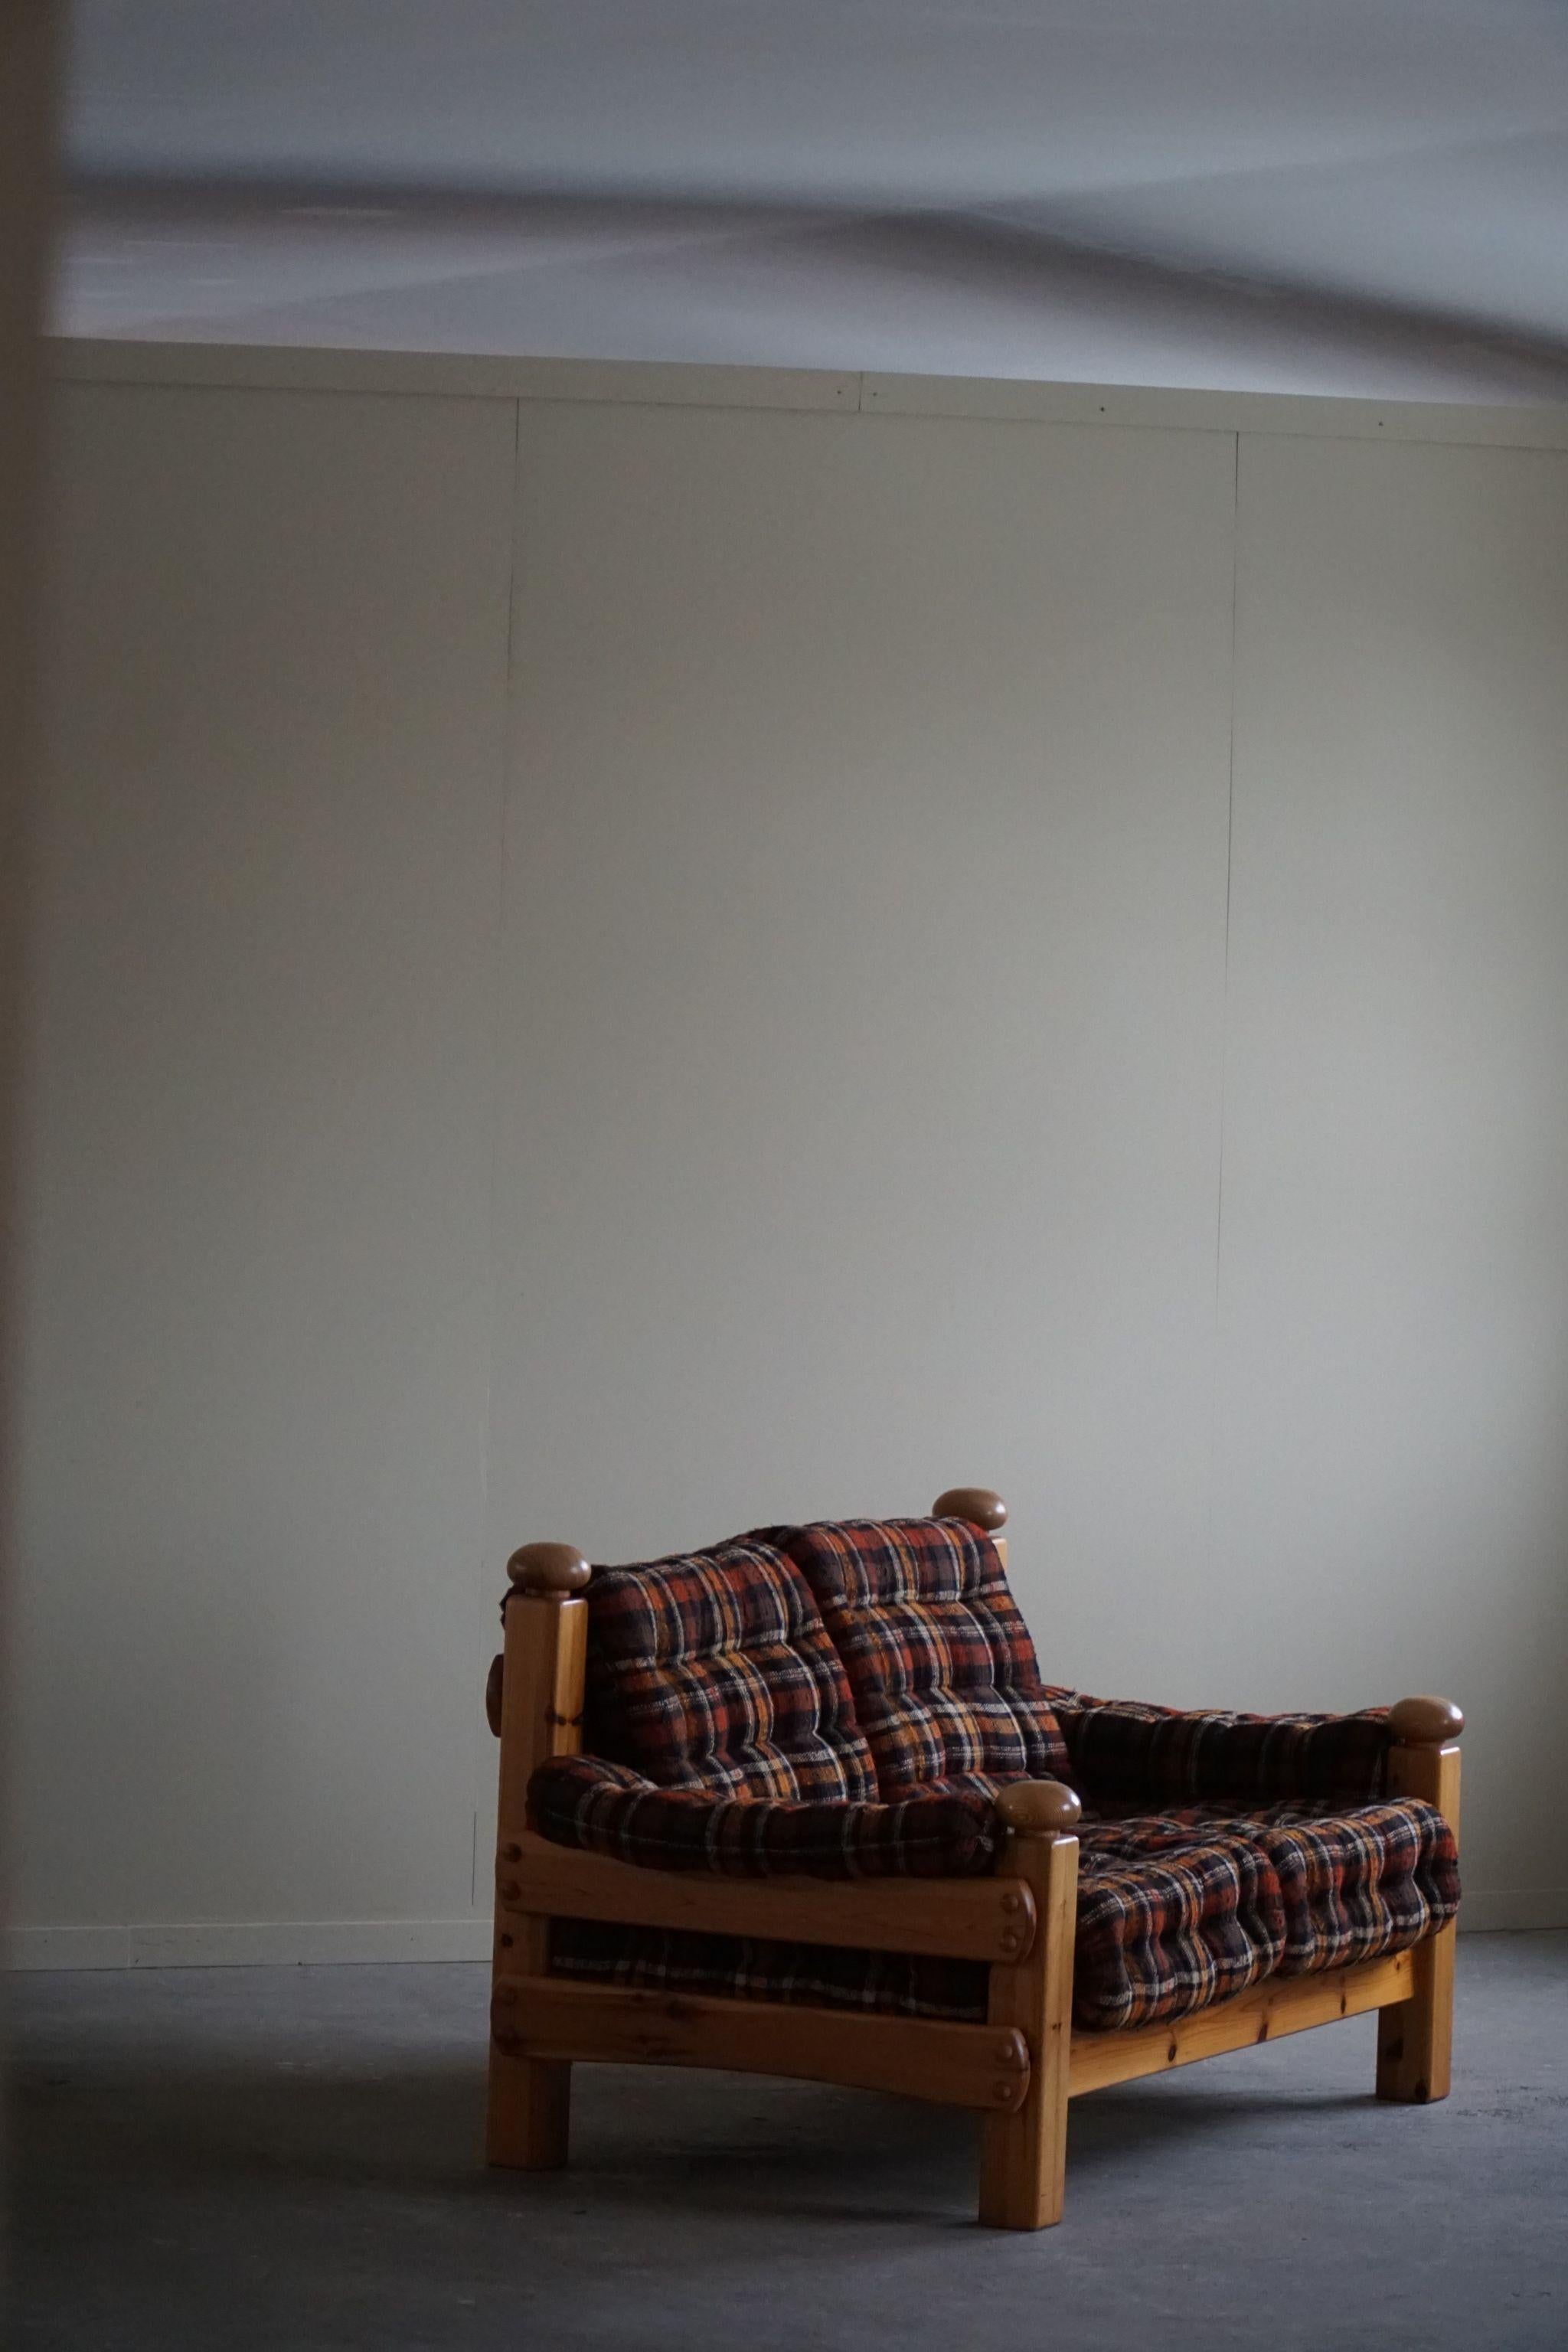 Two Seater Brutalist Sofa in Solid Pine, Swedish Modern, Made in the 1970s For Sale 3